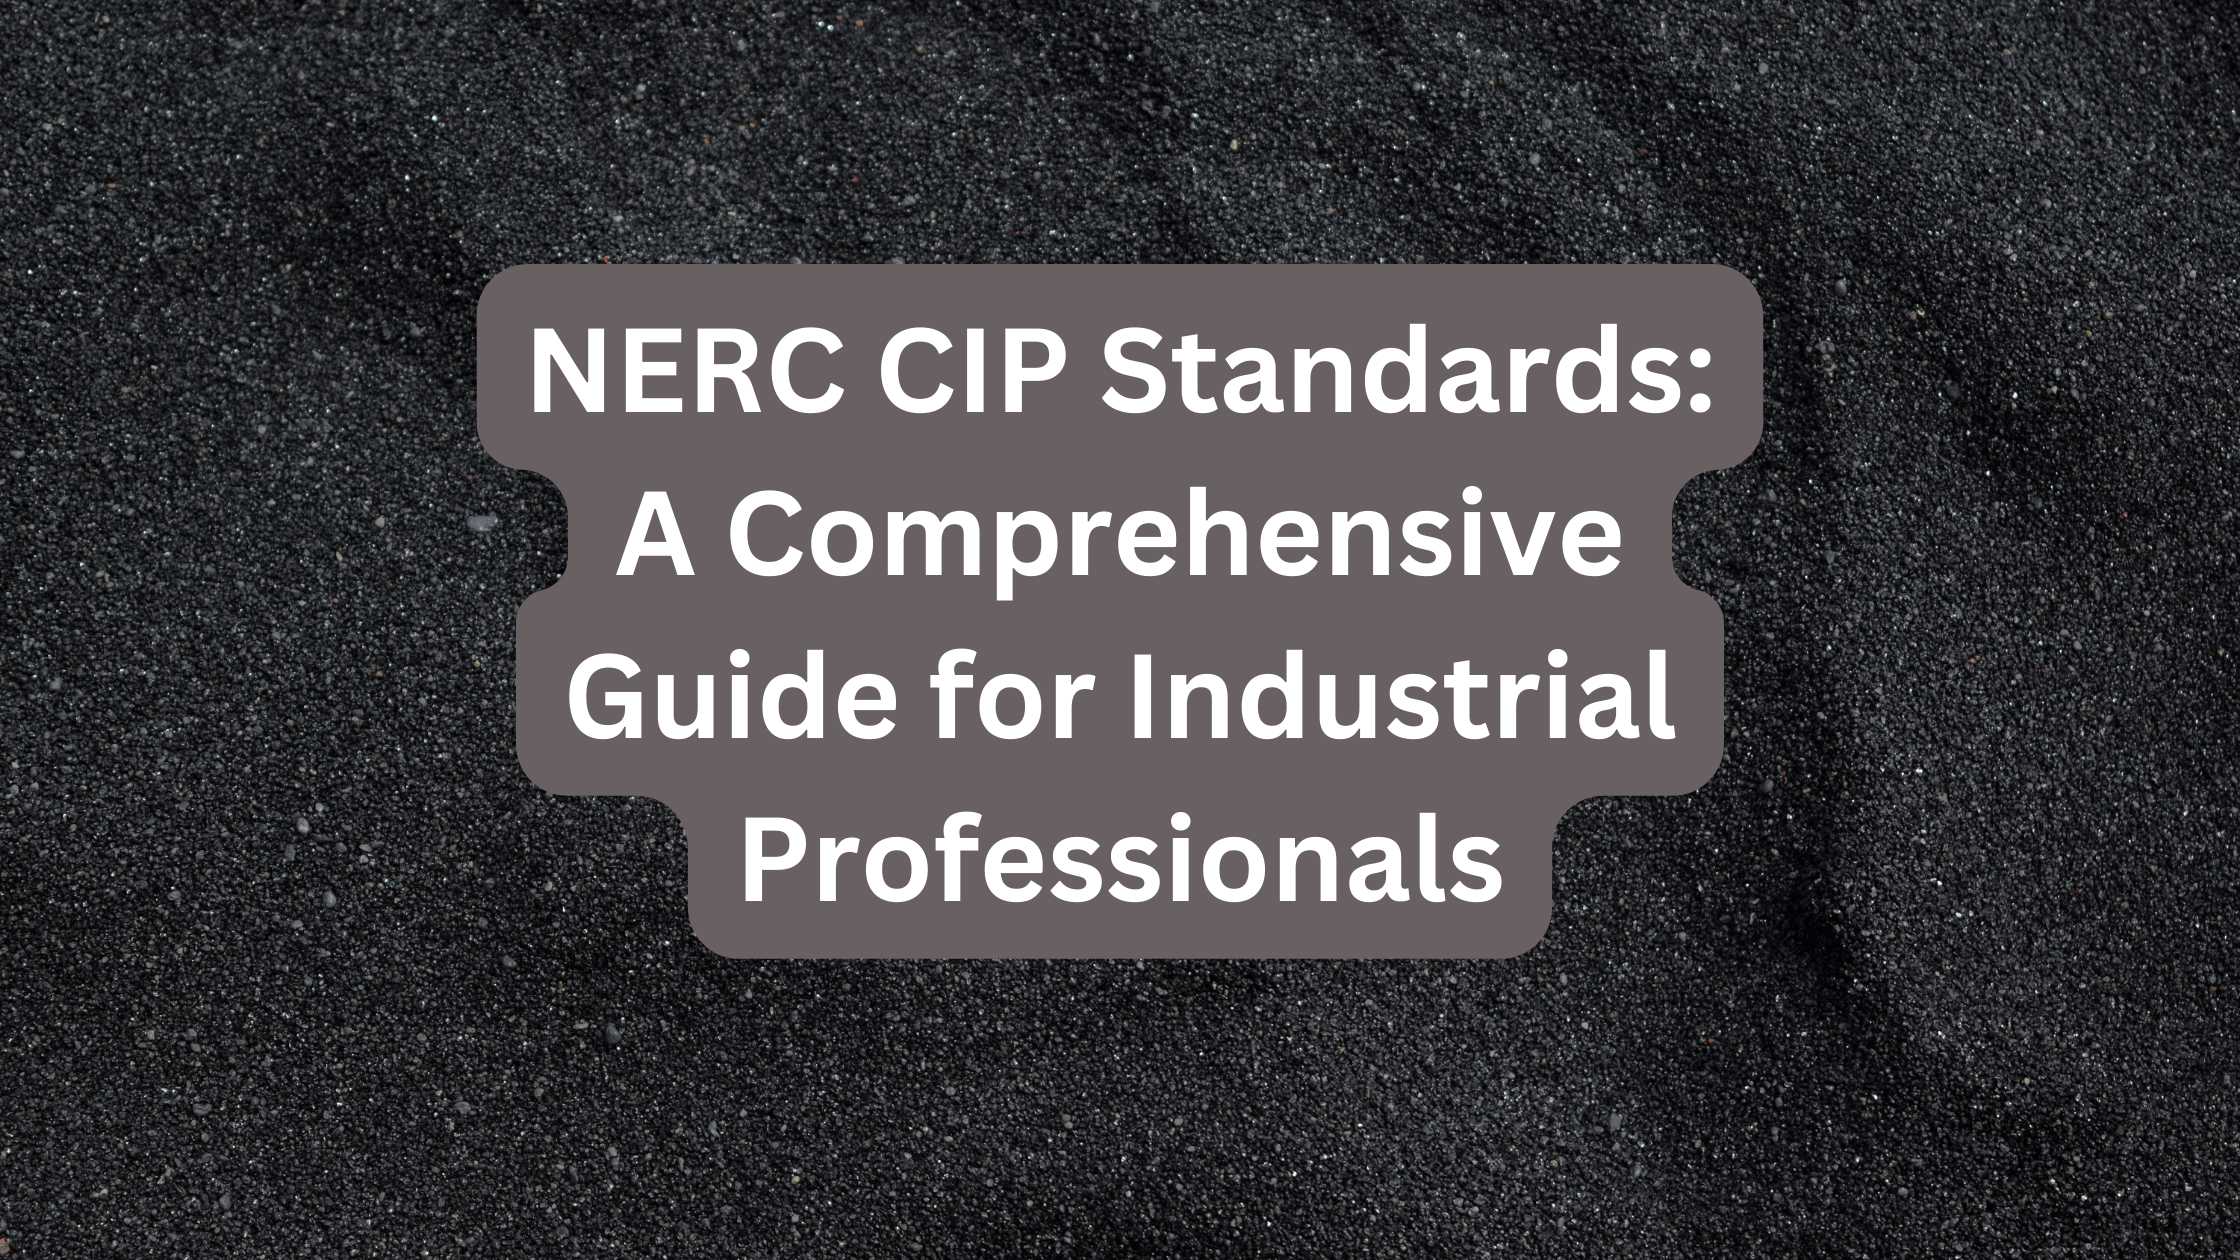 NERC CIP Standards: A Comprehensive Guide for Industrial Professionals